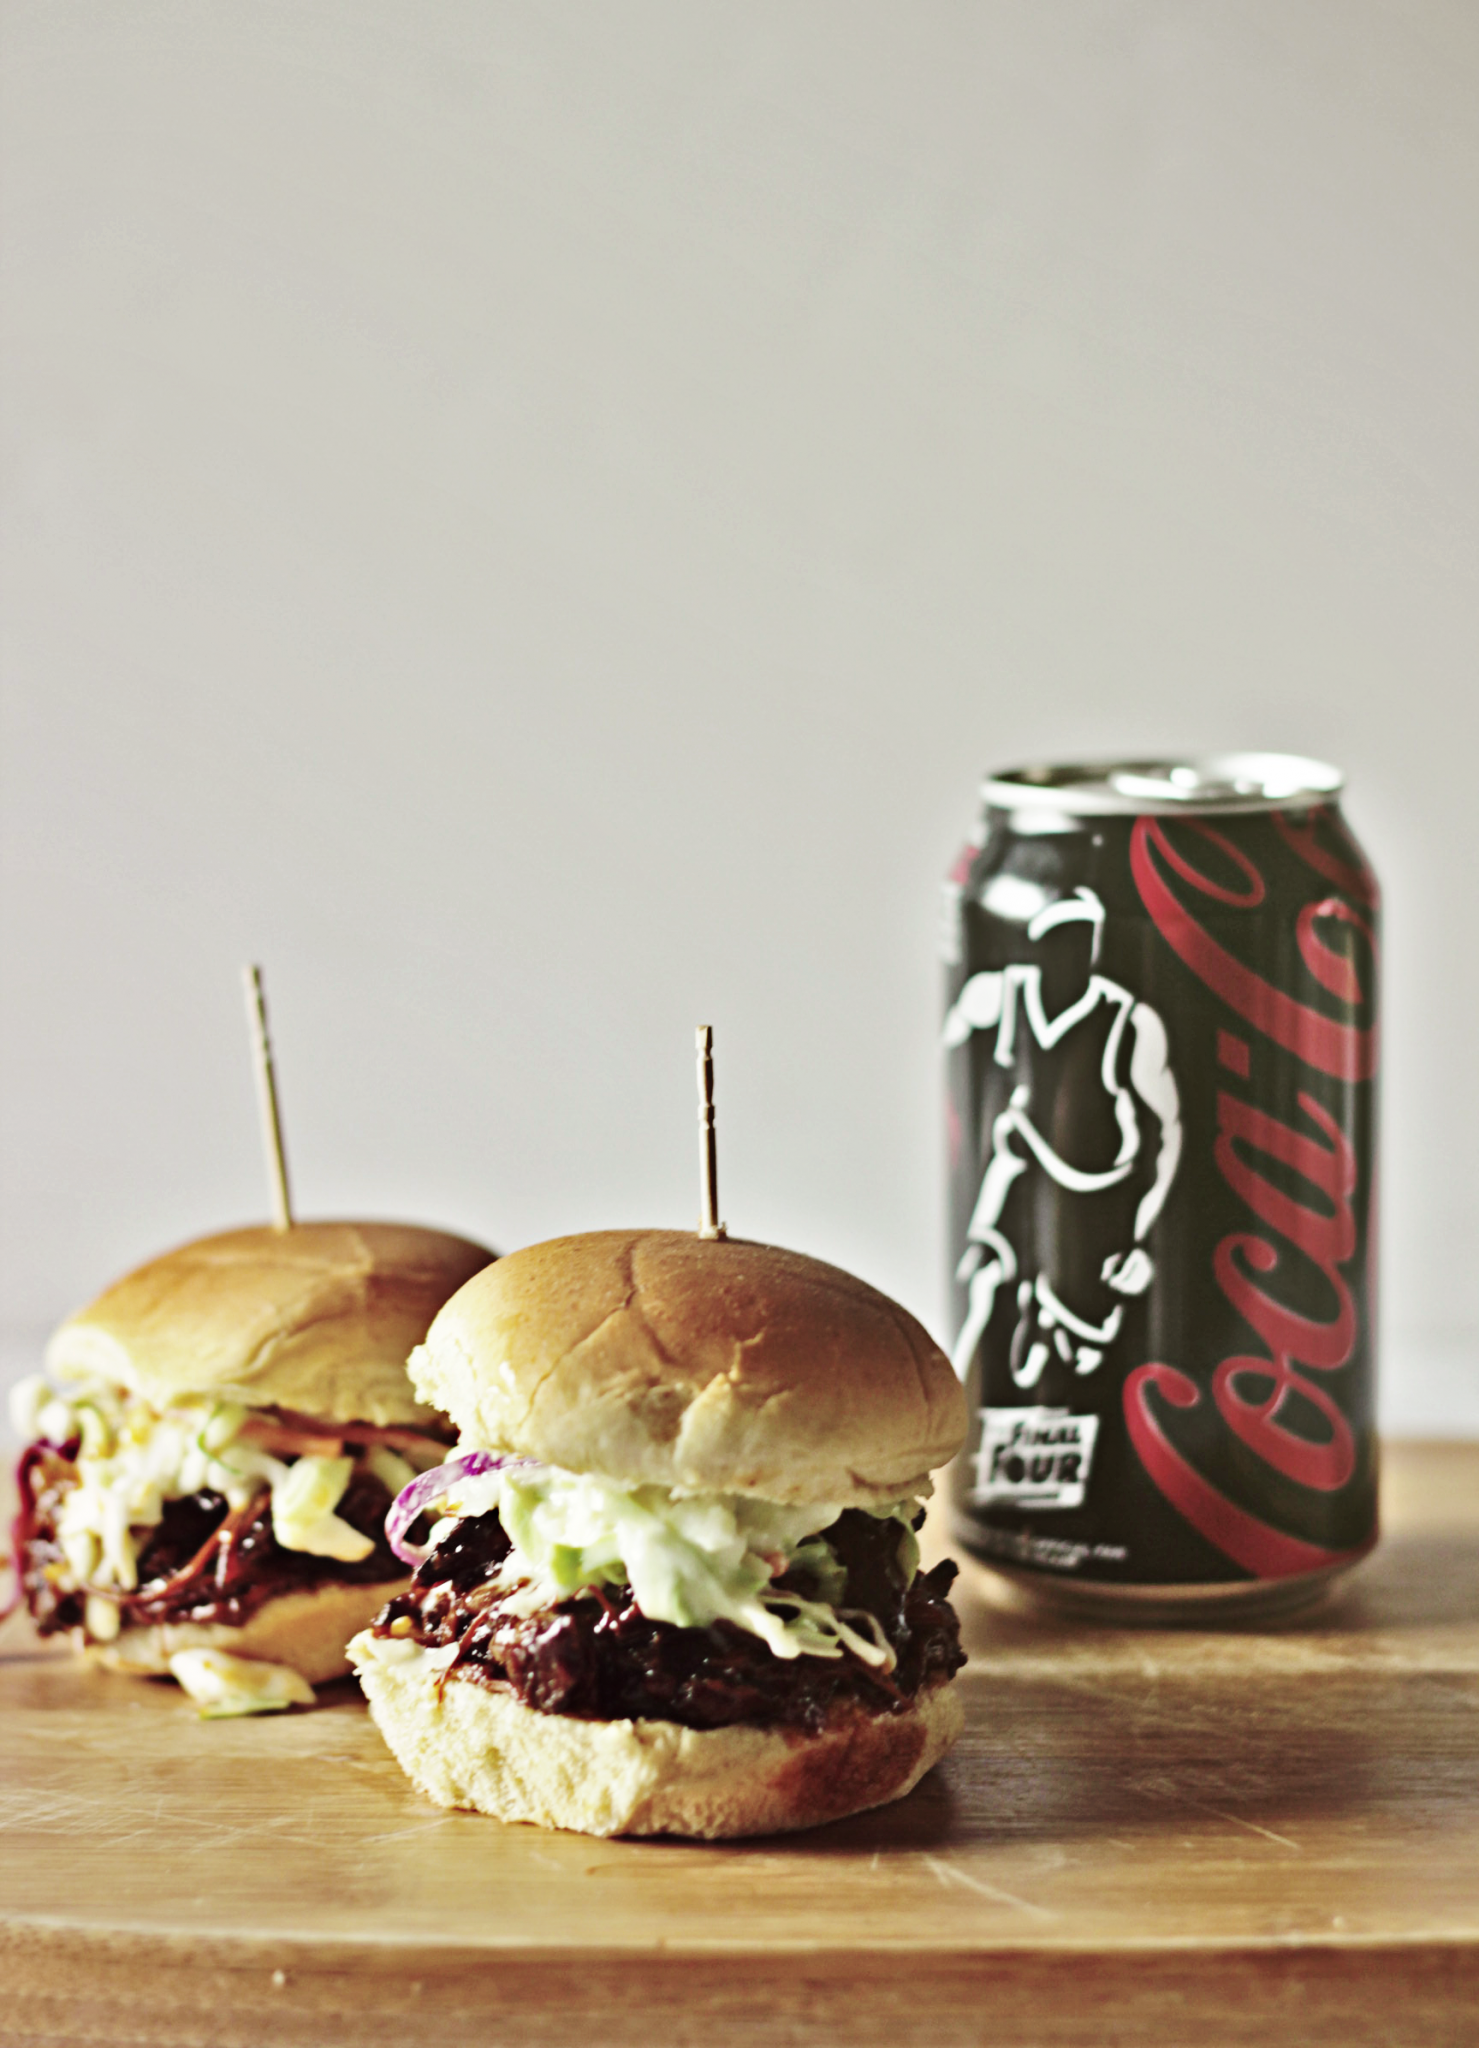 Looking for an EASY BBQ pulled pork slider recipe? Los Angeles blogger Jamie Lewis is sharing her favorite Coca-Cola Zero BBQ Pulled Pork Sliders recipe HERE!